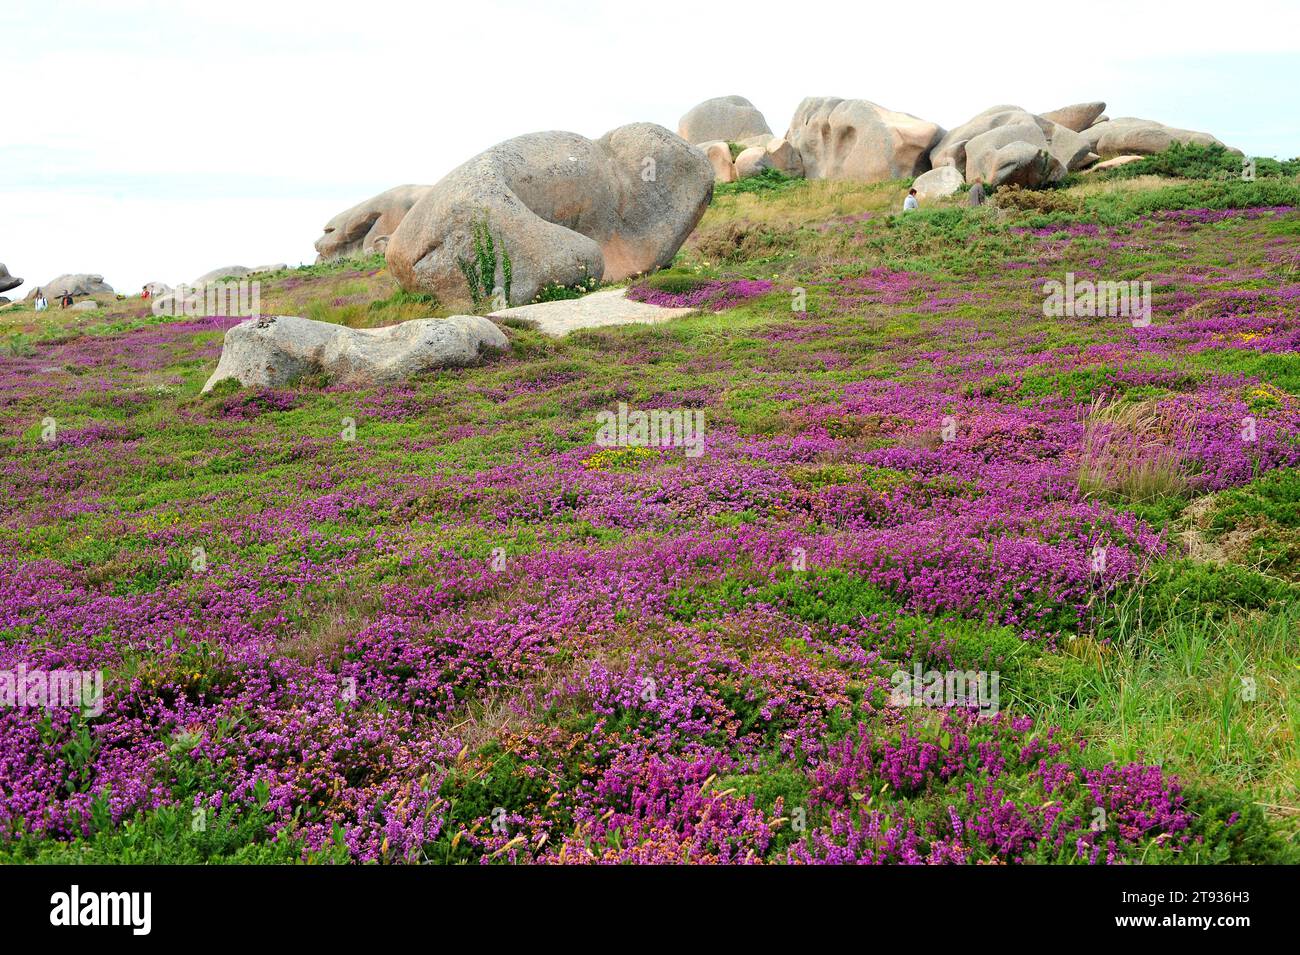 Bell heather (Erica cinerea) is a shrub native to western Europe from Spain to Norway. This photo was taken in Armor Coast, Brittany, France. Stock Photo